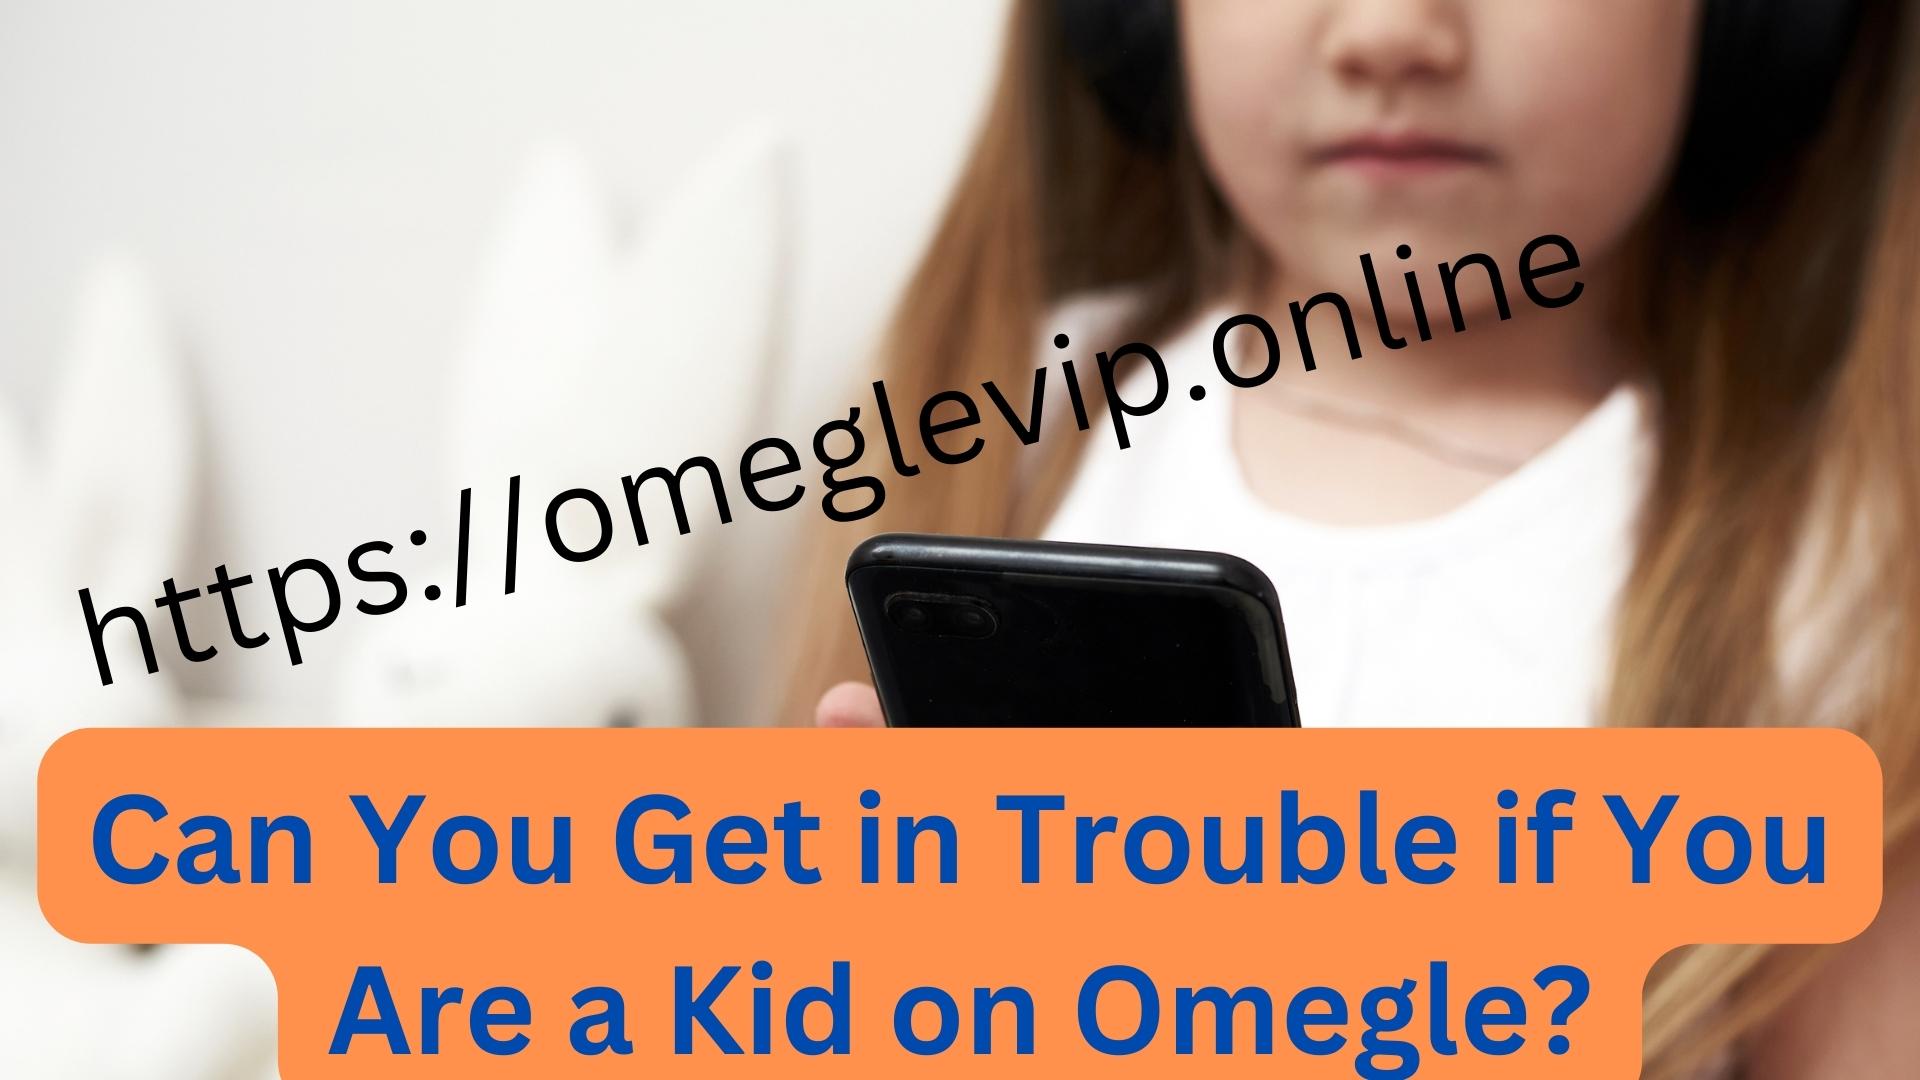 Can You Get in Trouble if You Are a Kid on Omegle?